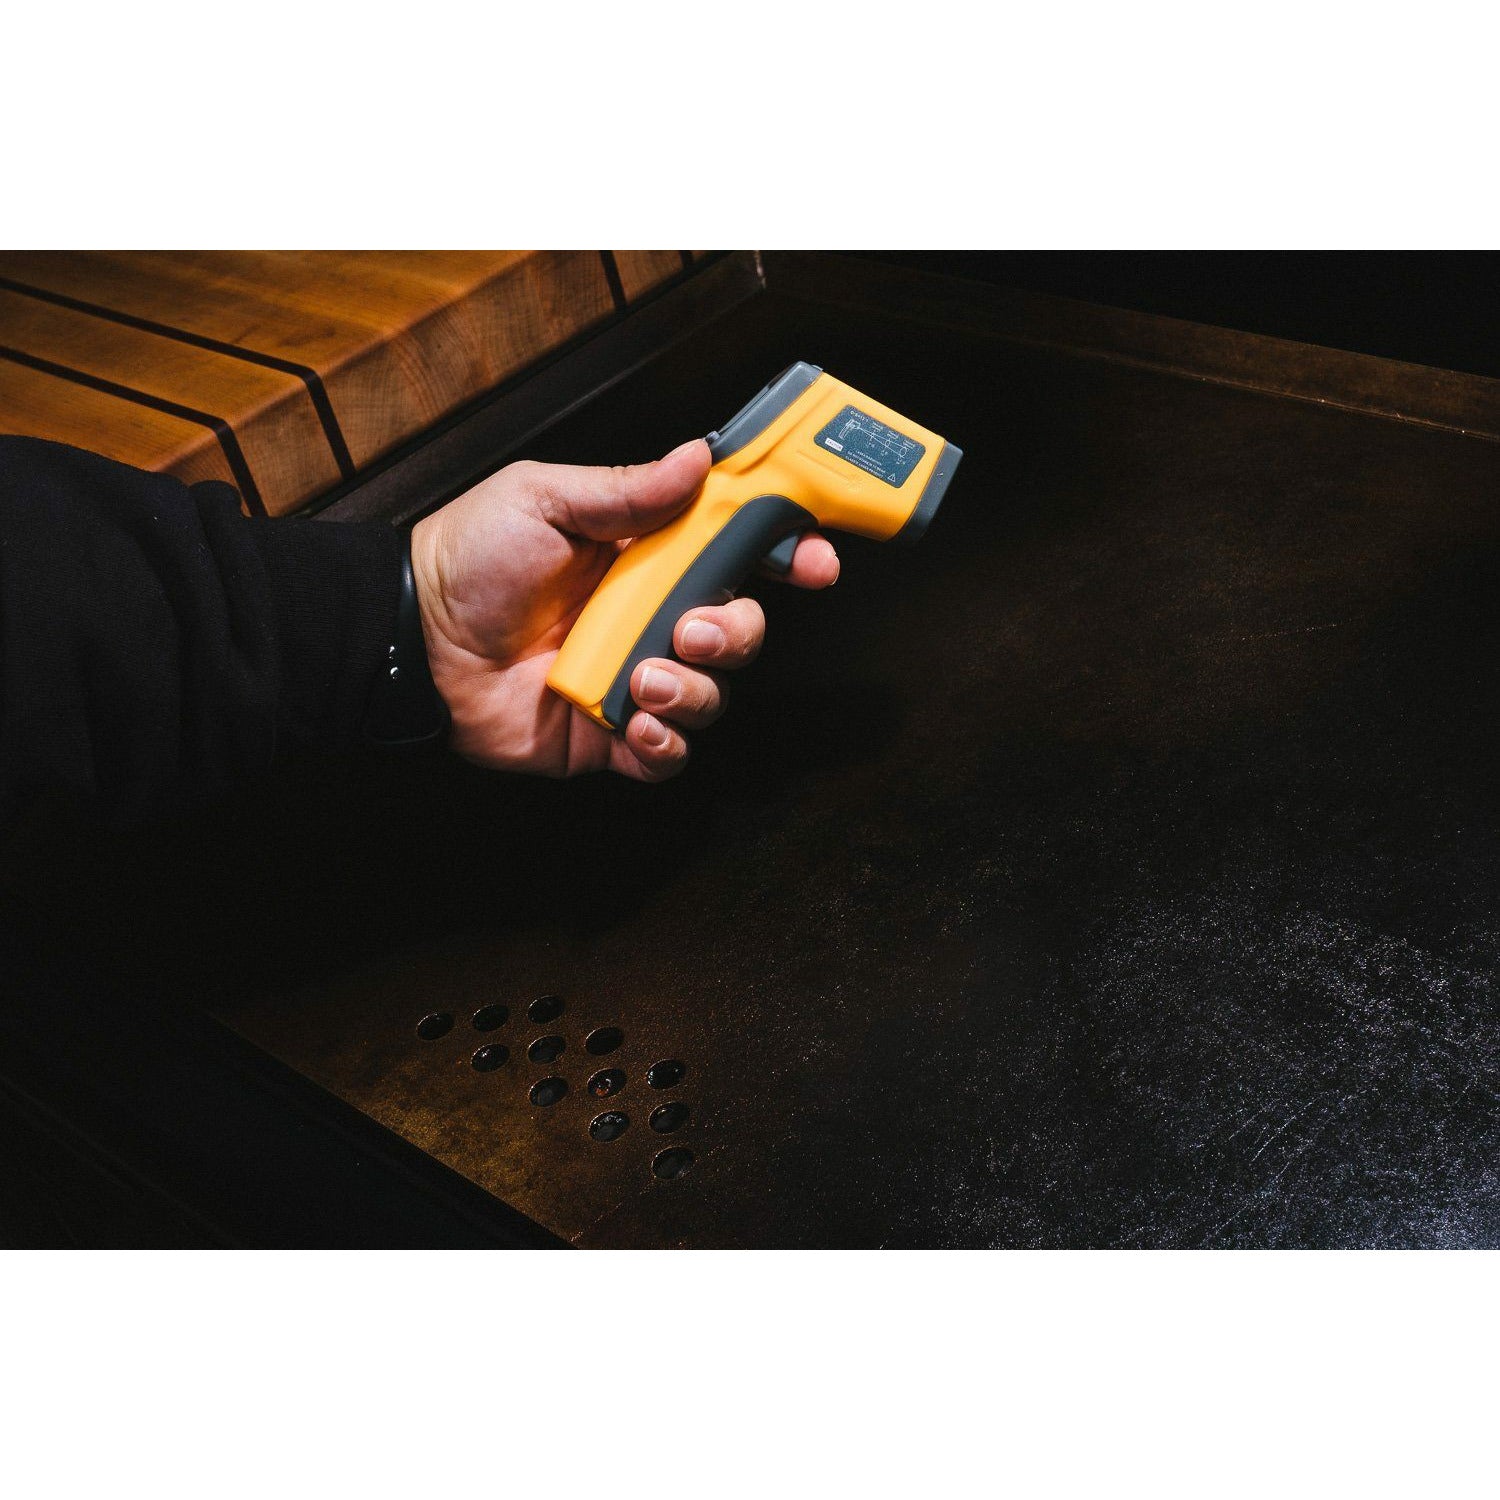 Blackstone Infrared Thermometer with LCD Display and Steel Probe